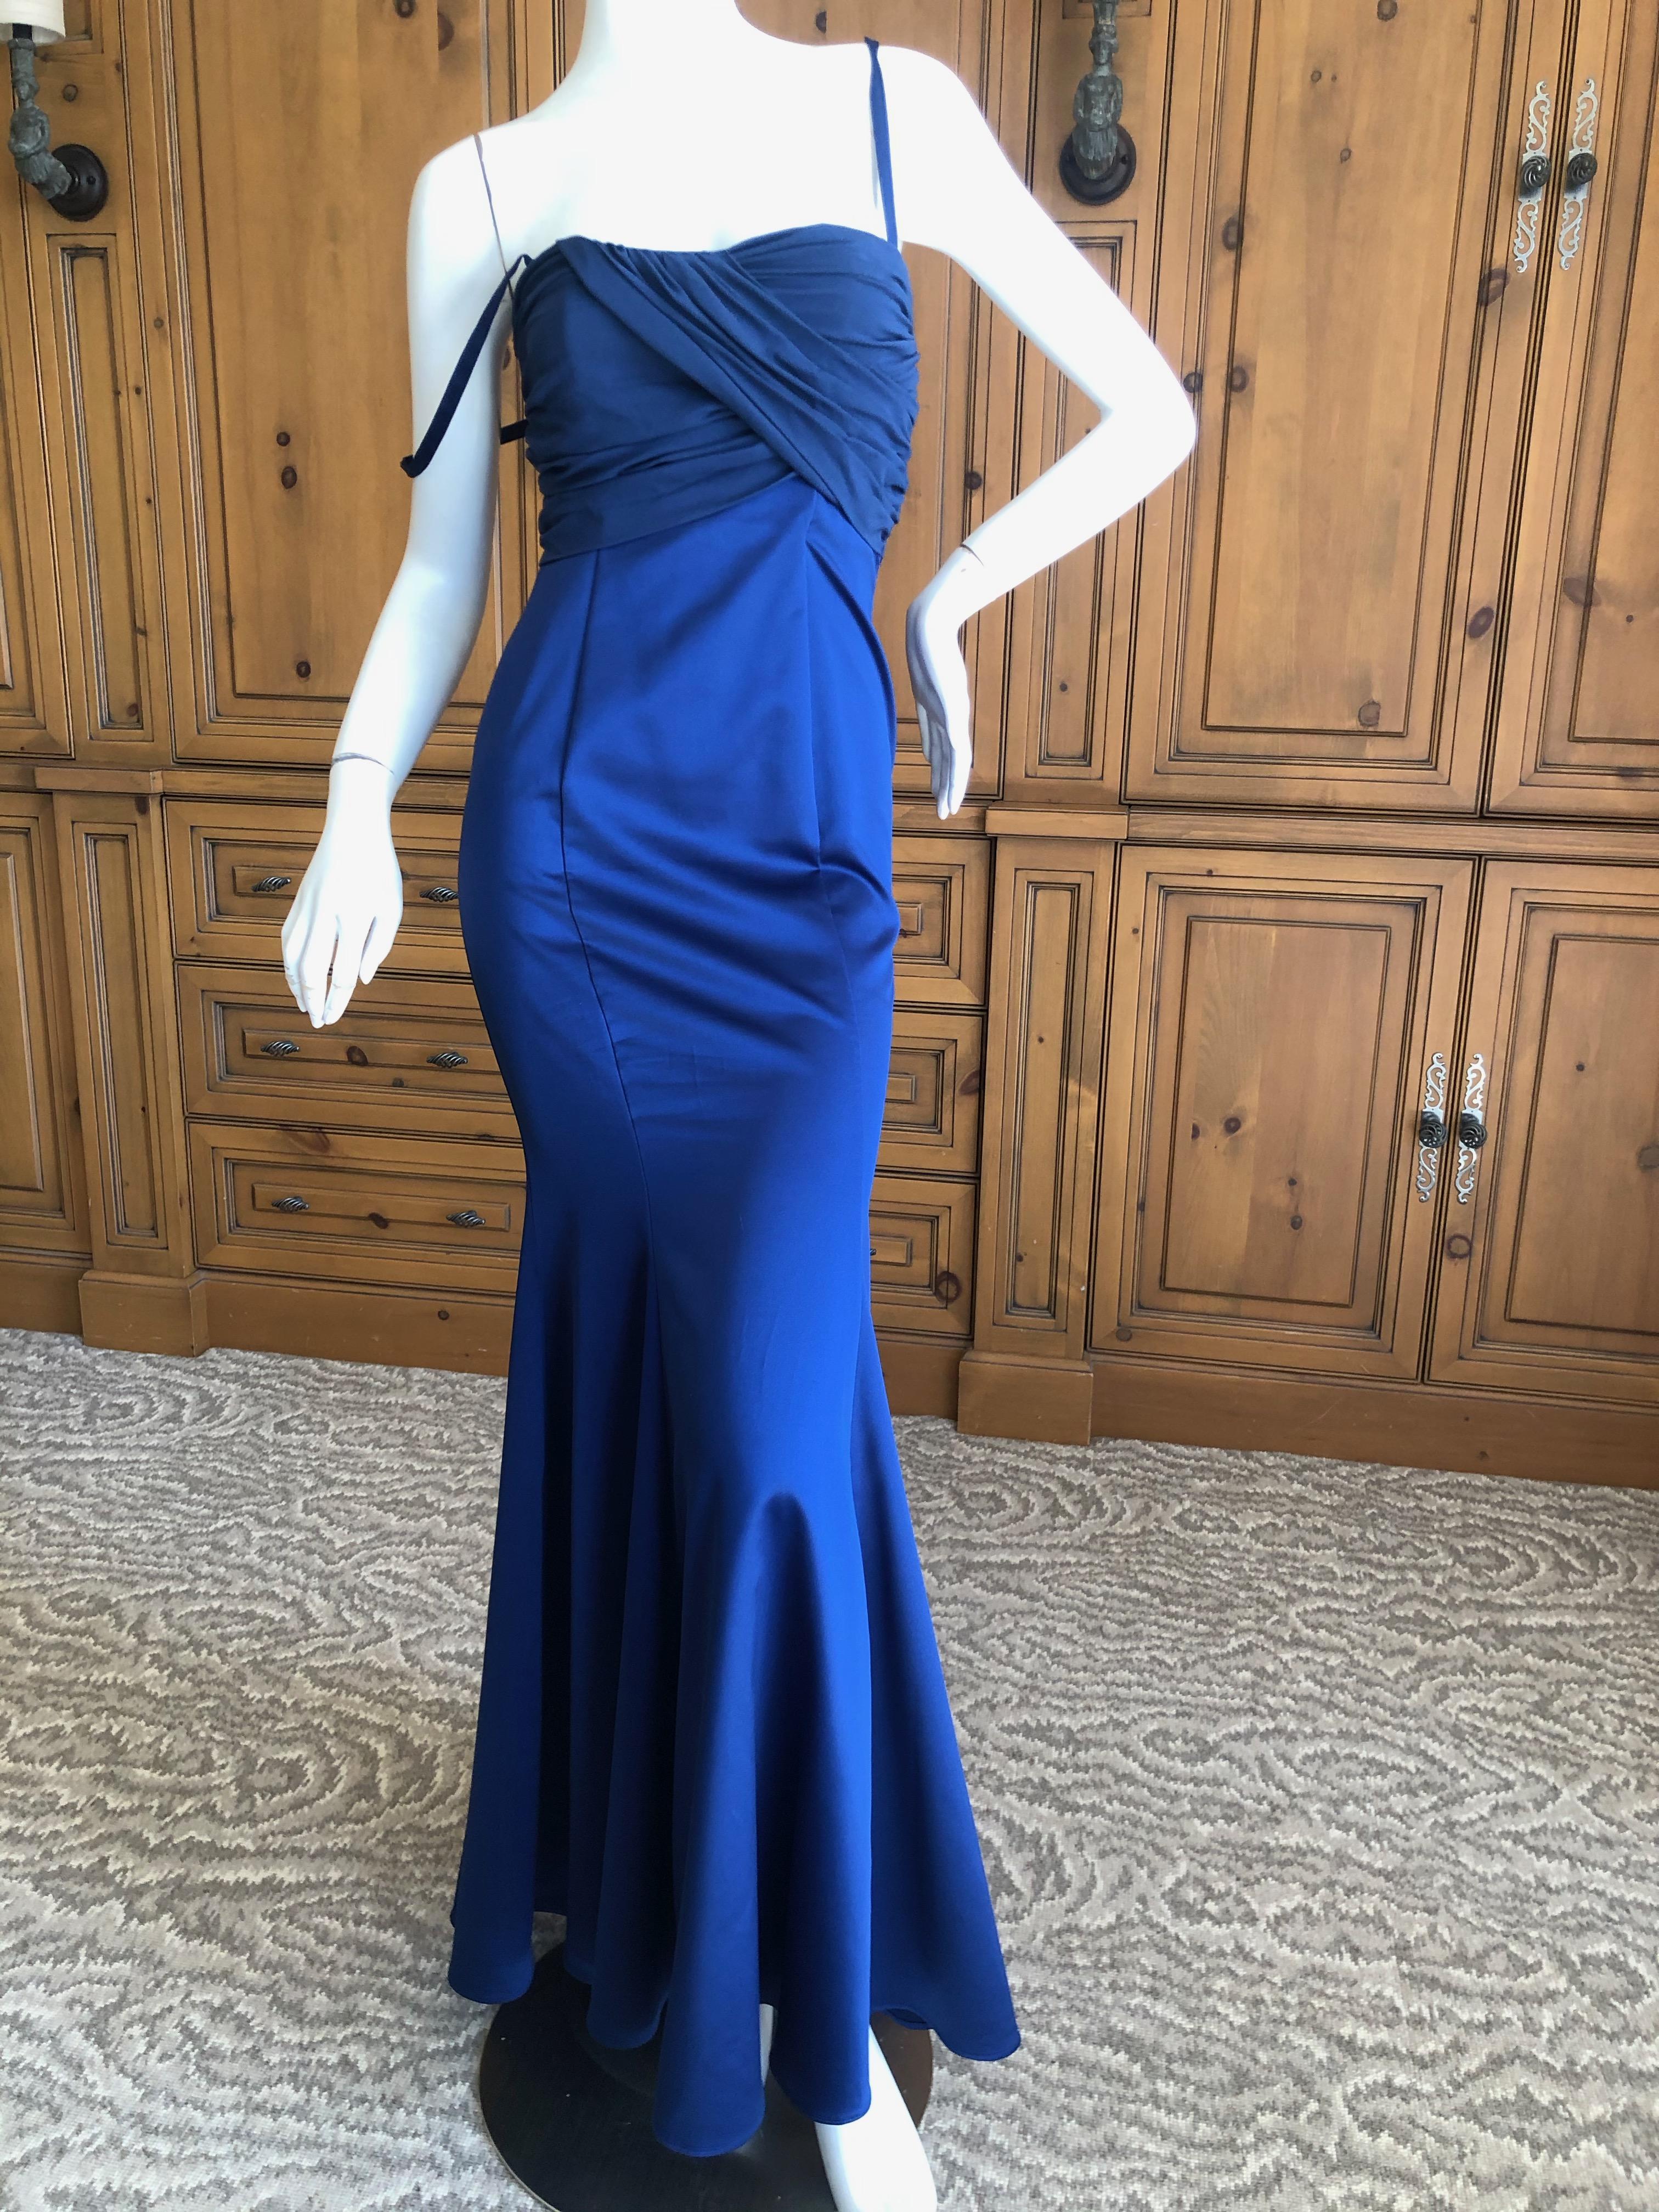  Roberto Cavalli for Just Cavalli Elegant Midnight Blue Evening Dress In Excellent Condition For Sale In Cloverdale, CA